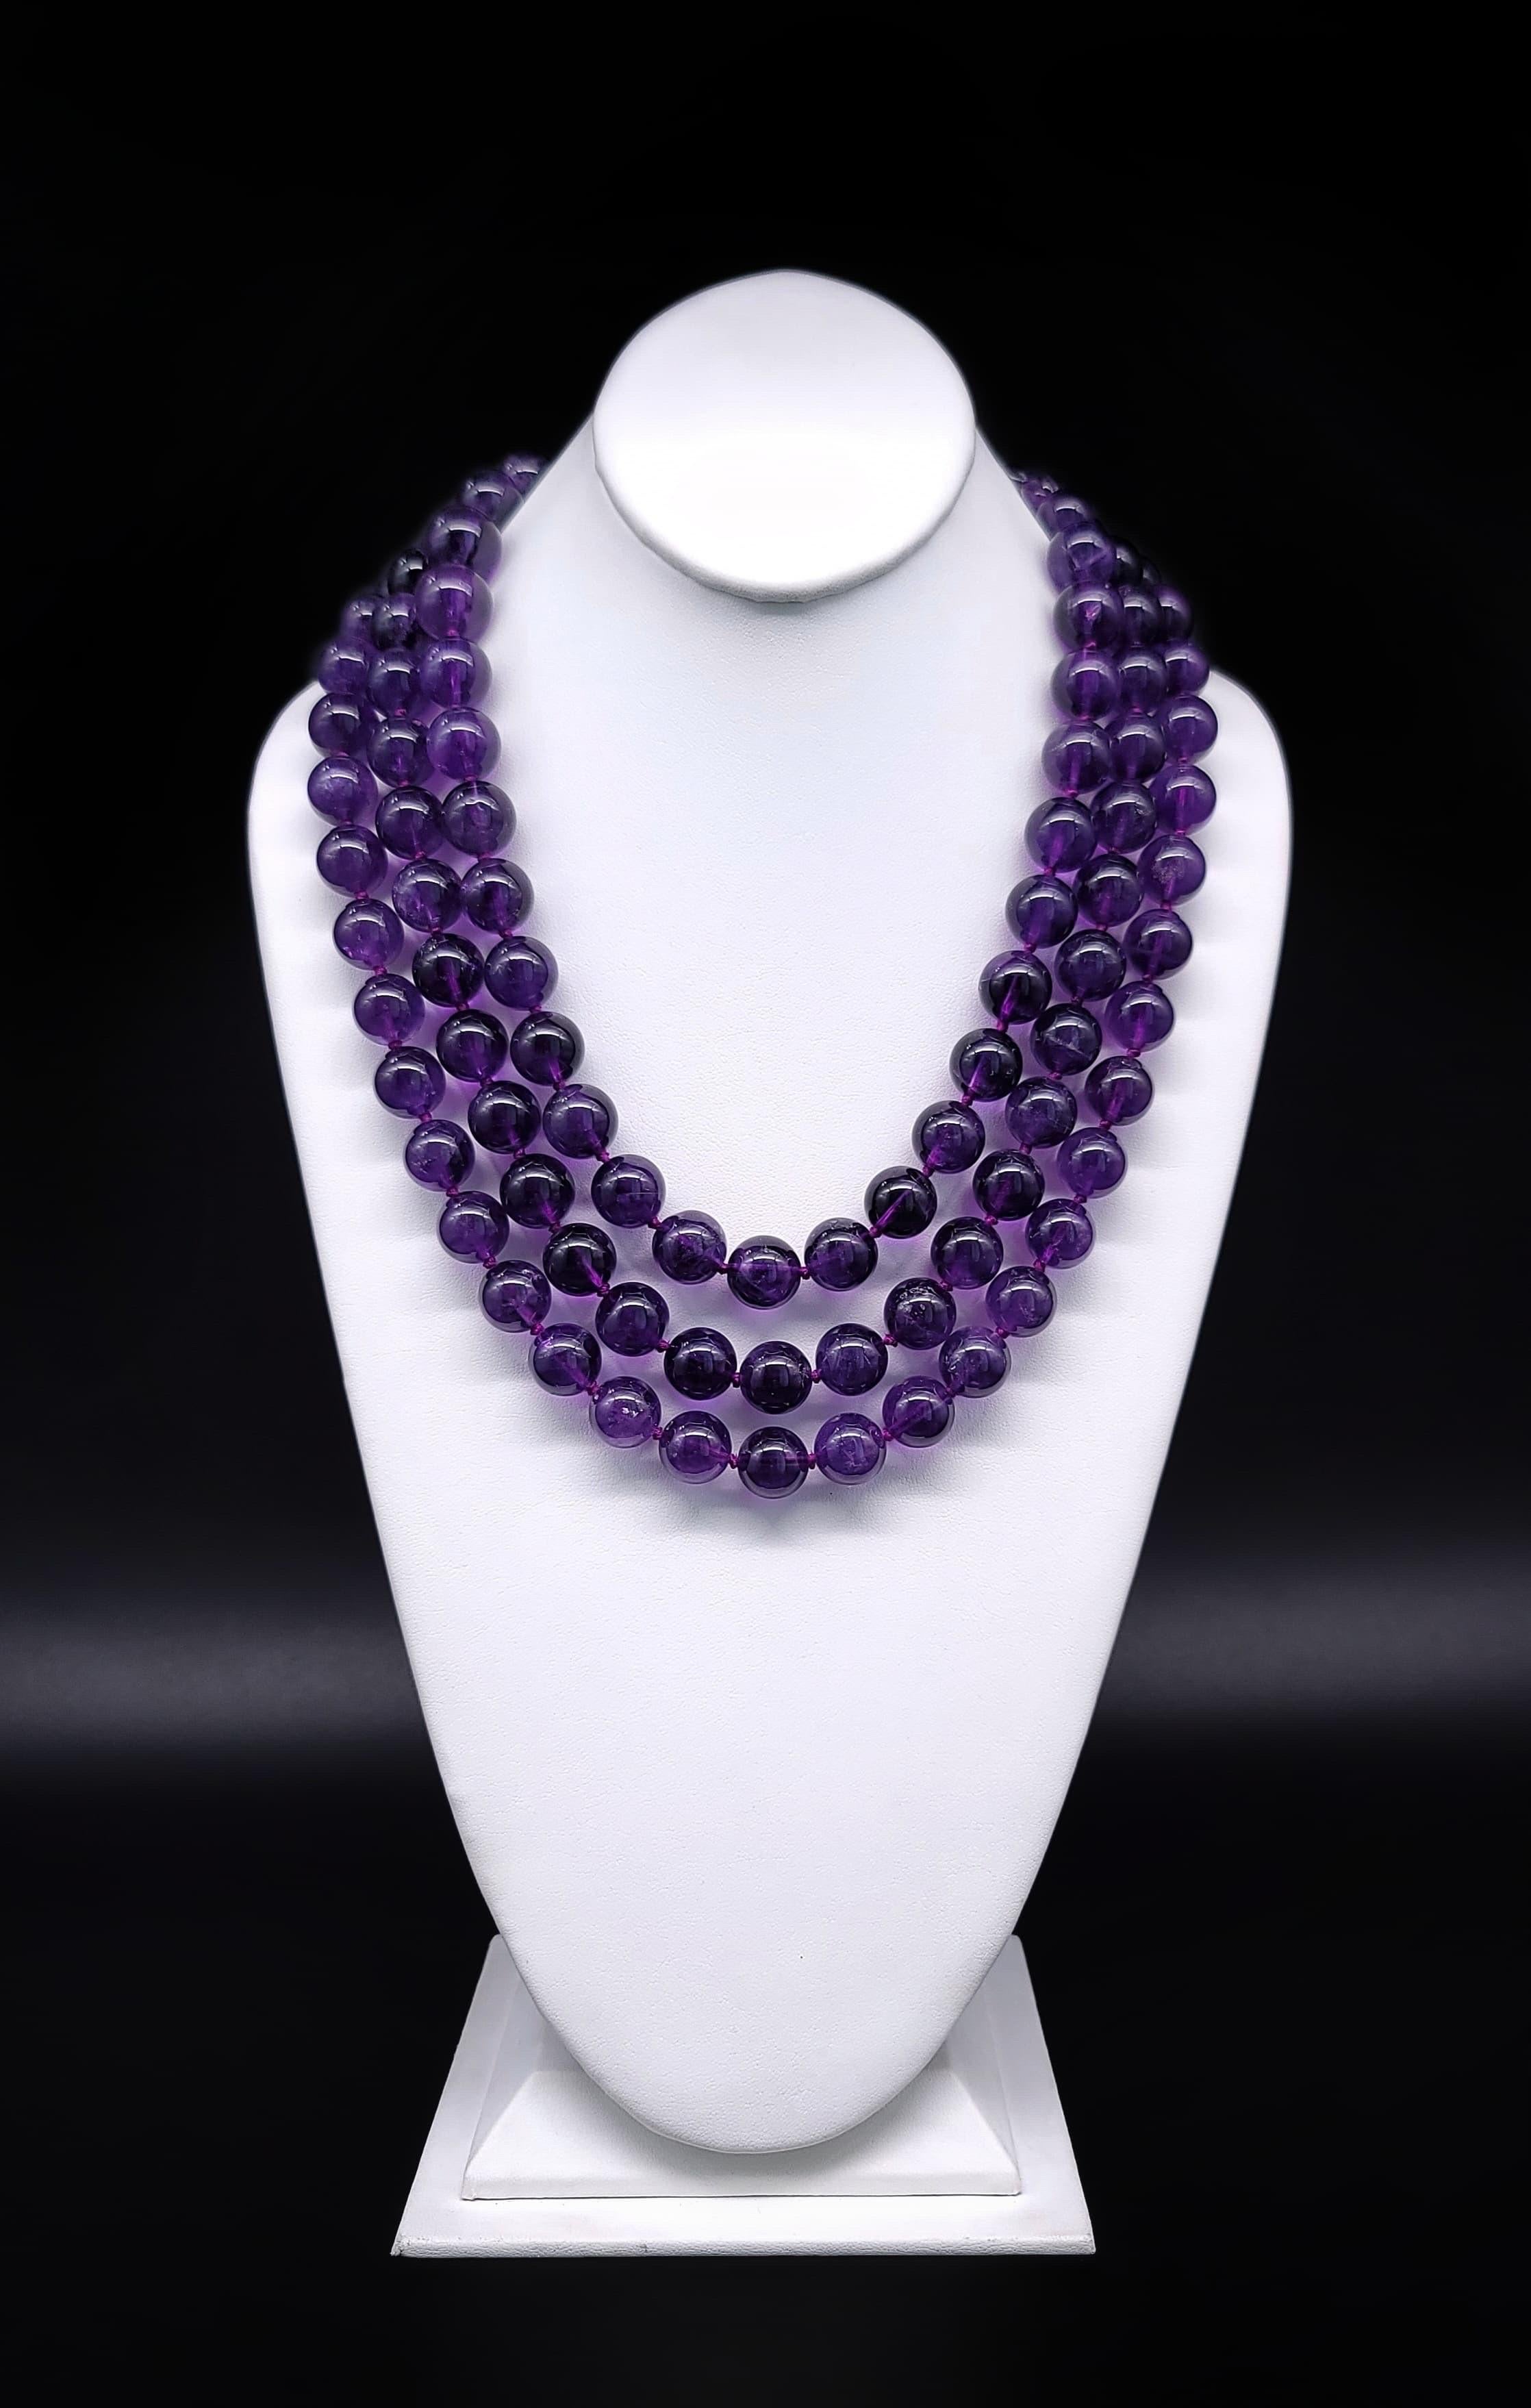 Bead A.Jeschel  Amethyst necklace with a Vintage Venetian glass clasp.